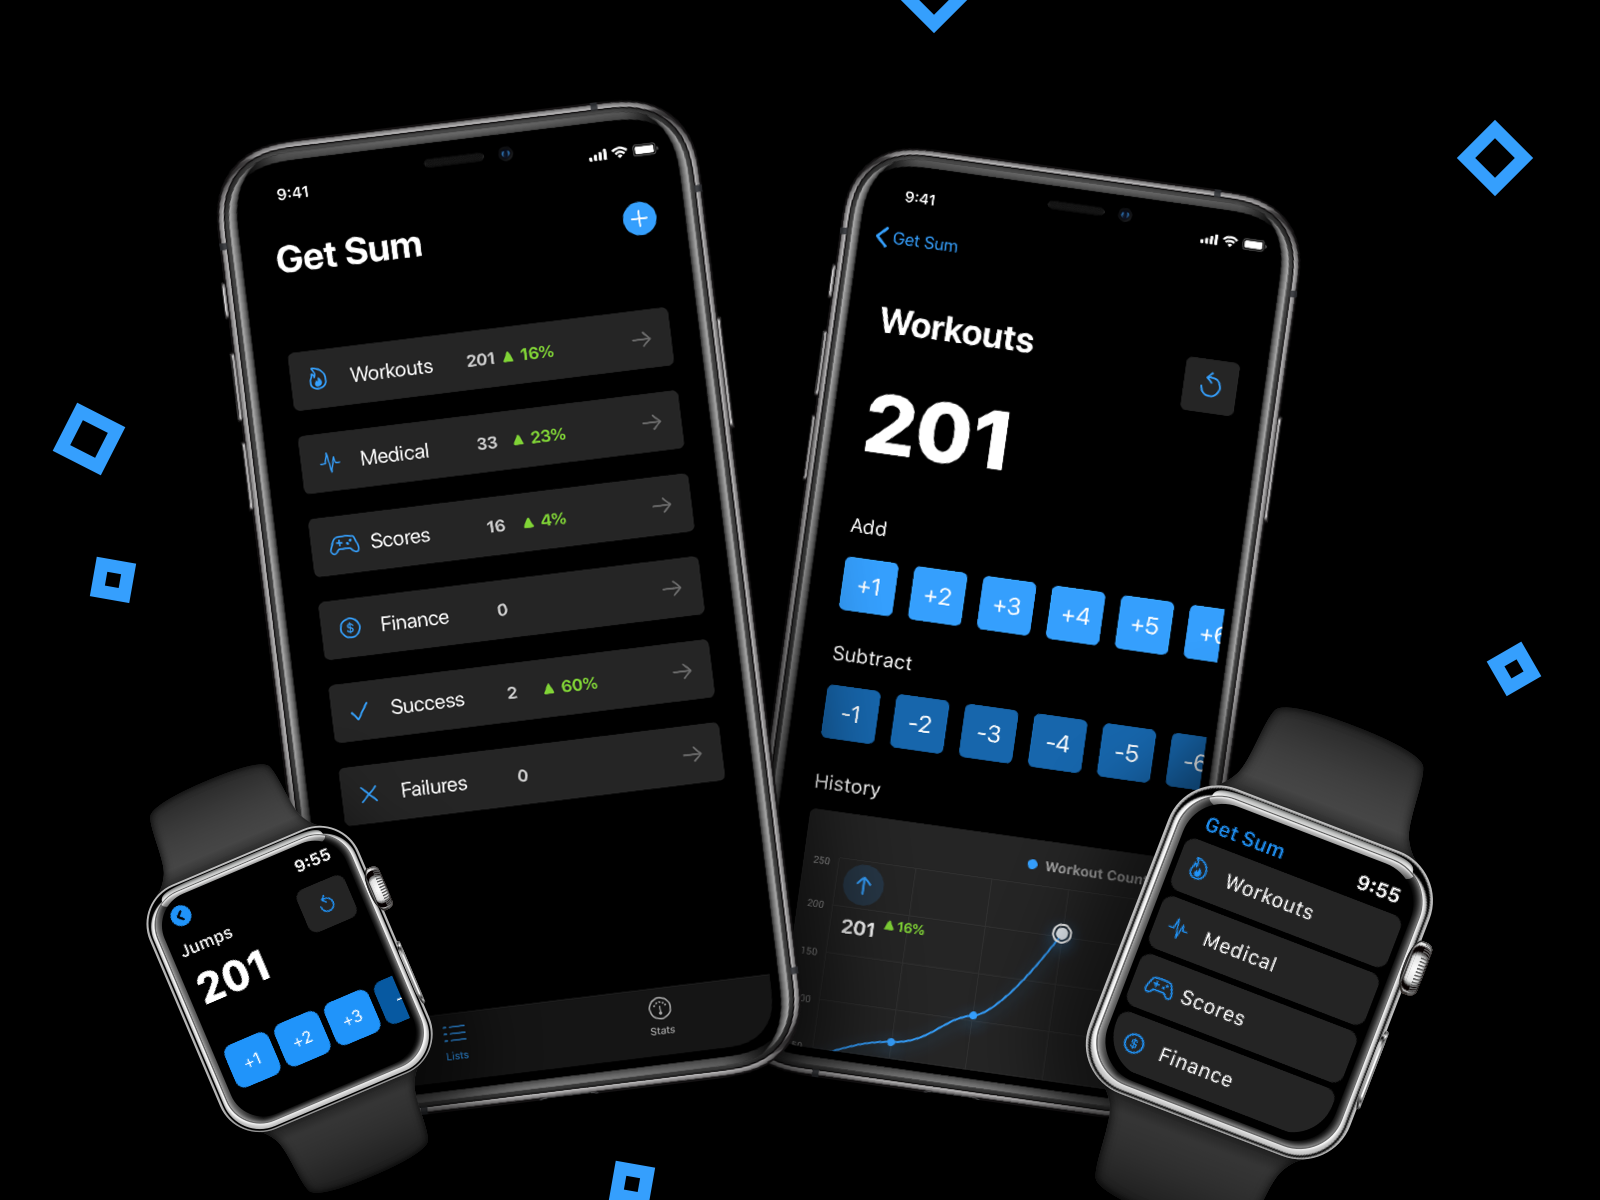 Shown is a preview of the Get Sum app